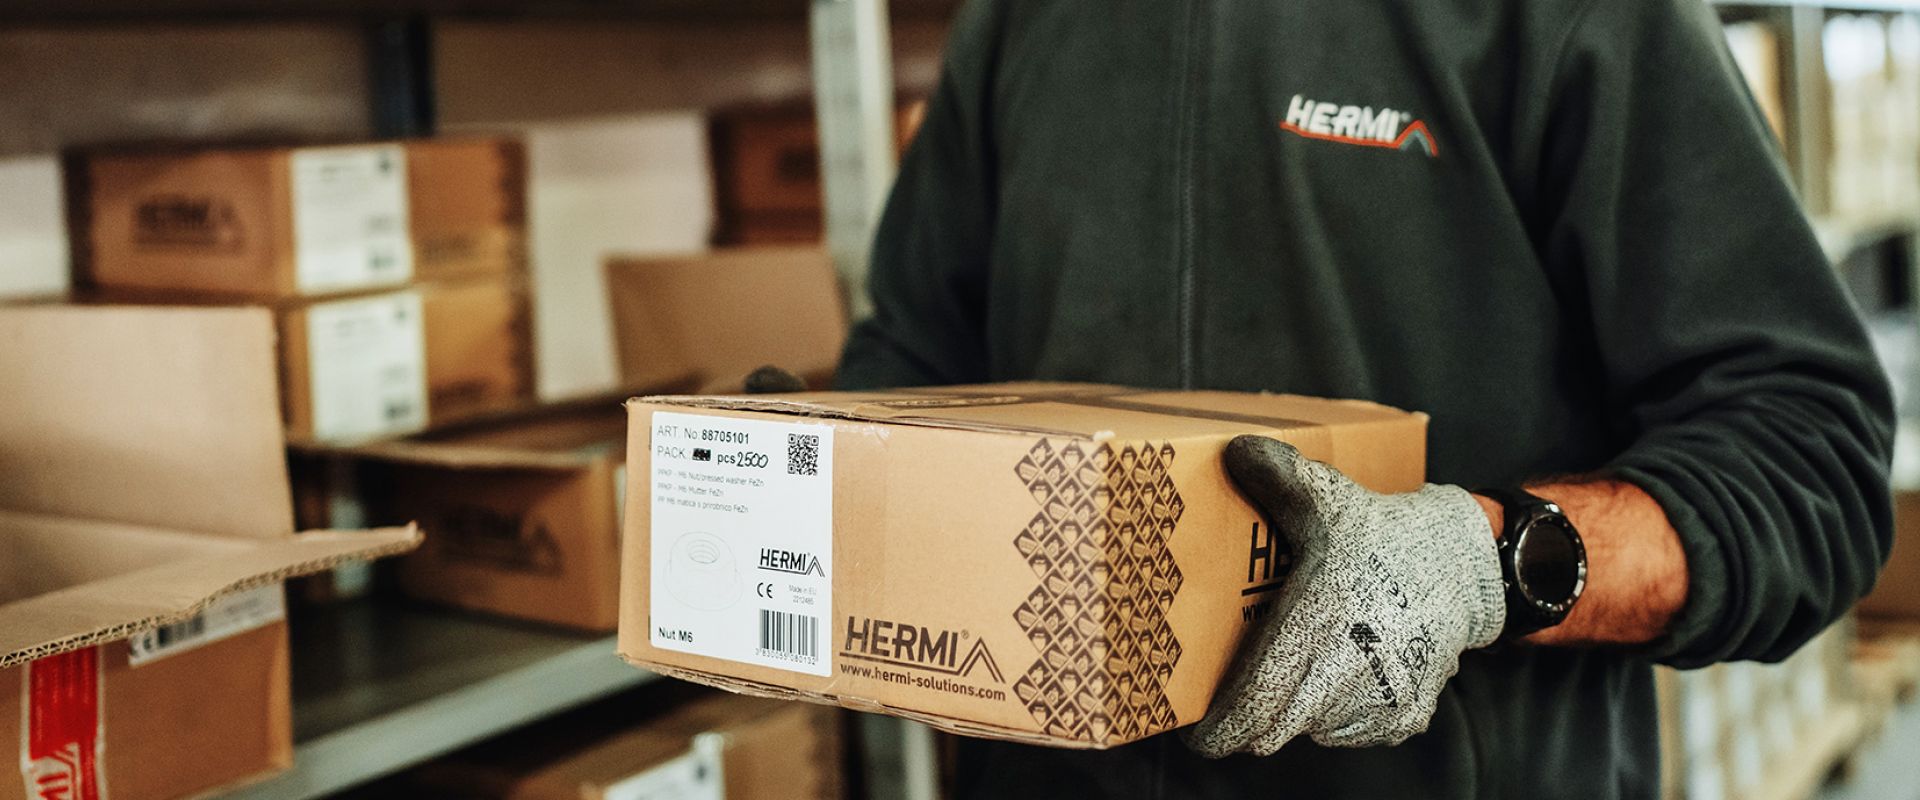 Notice of possible disruptions or delays in the deliveries of Hermi products